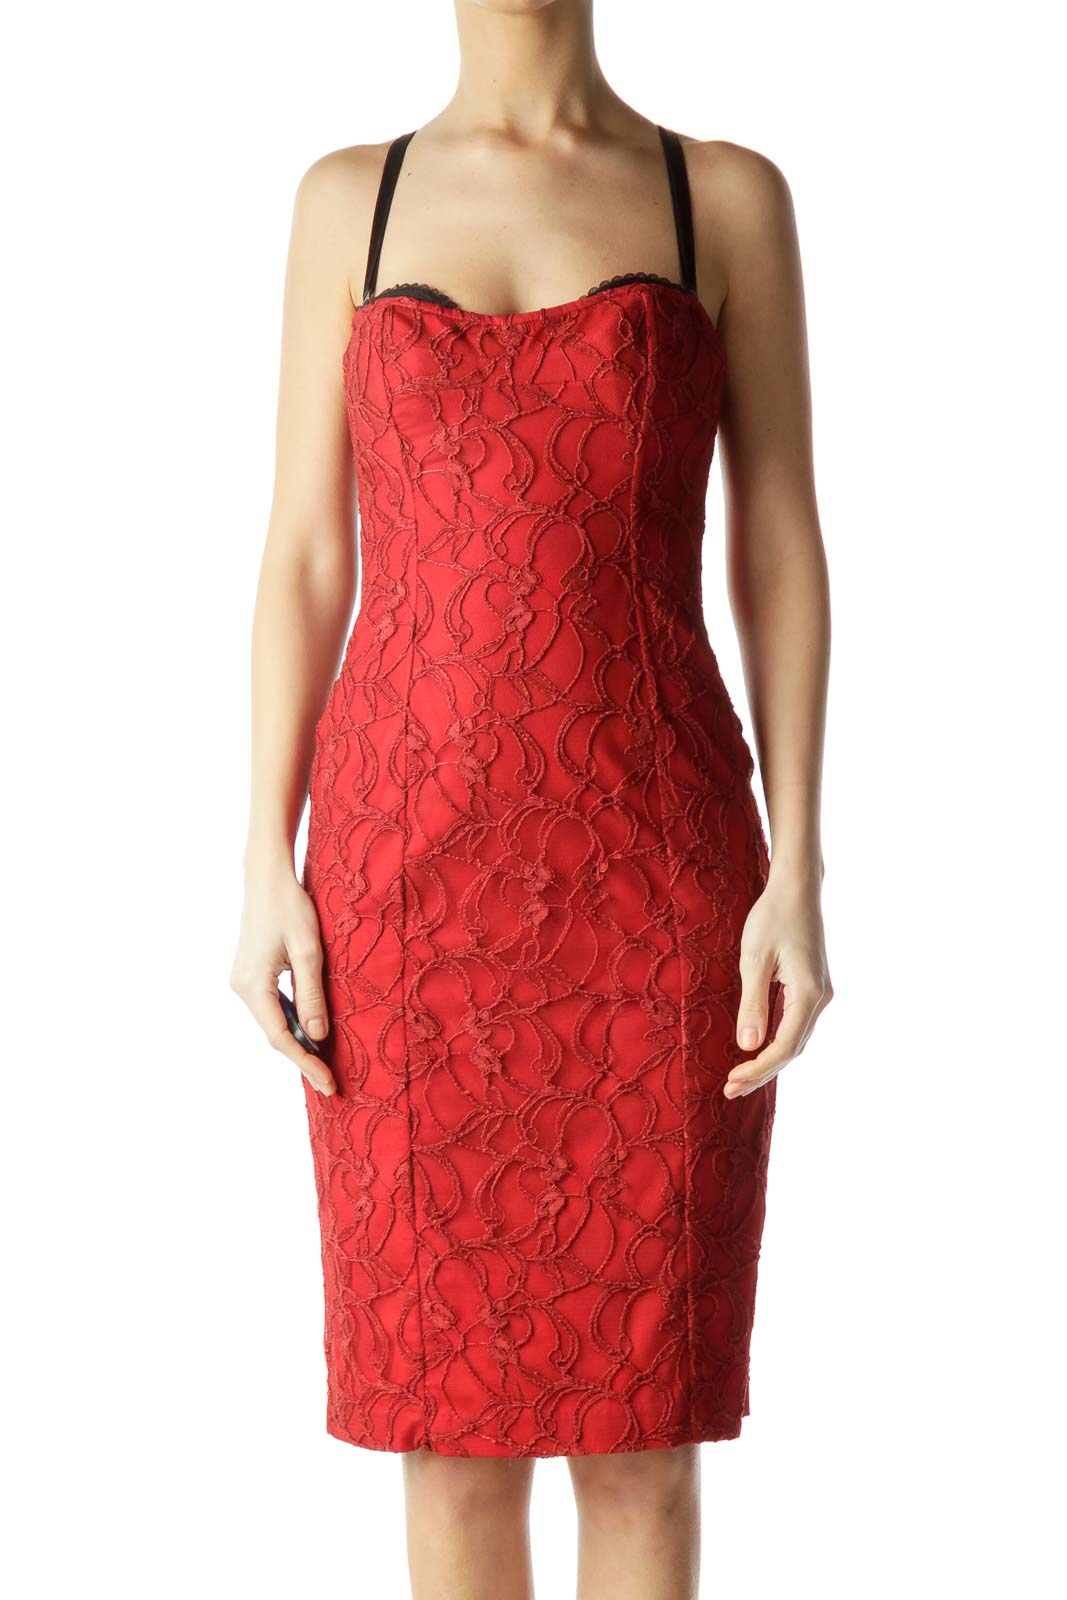 Red Floral Lace Dress Front